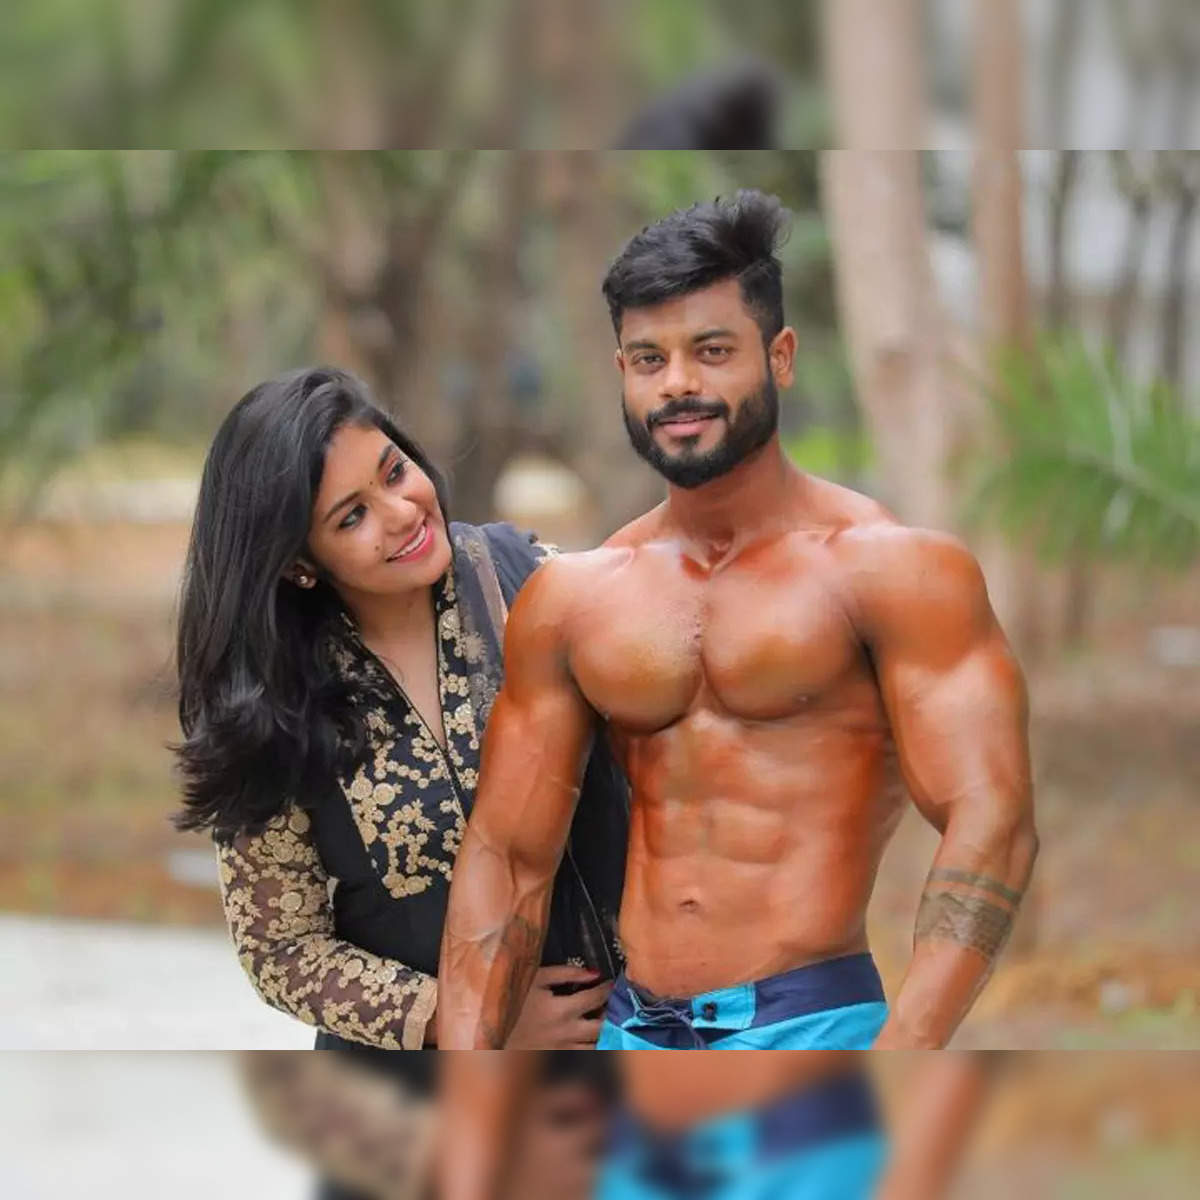 Www Priya Prakas Sexy Video Xxxnx Com - Sruthi Shanmuga Priya: Tamil TV actress Sruthi Shanmuga Priya urges media  to not spread rumours after fitness enthusiast husband Arvind Shekar passes  away at 30 - The Economic Times